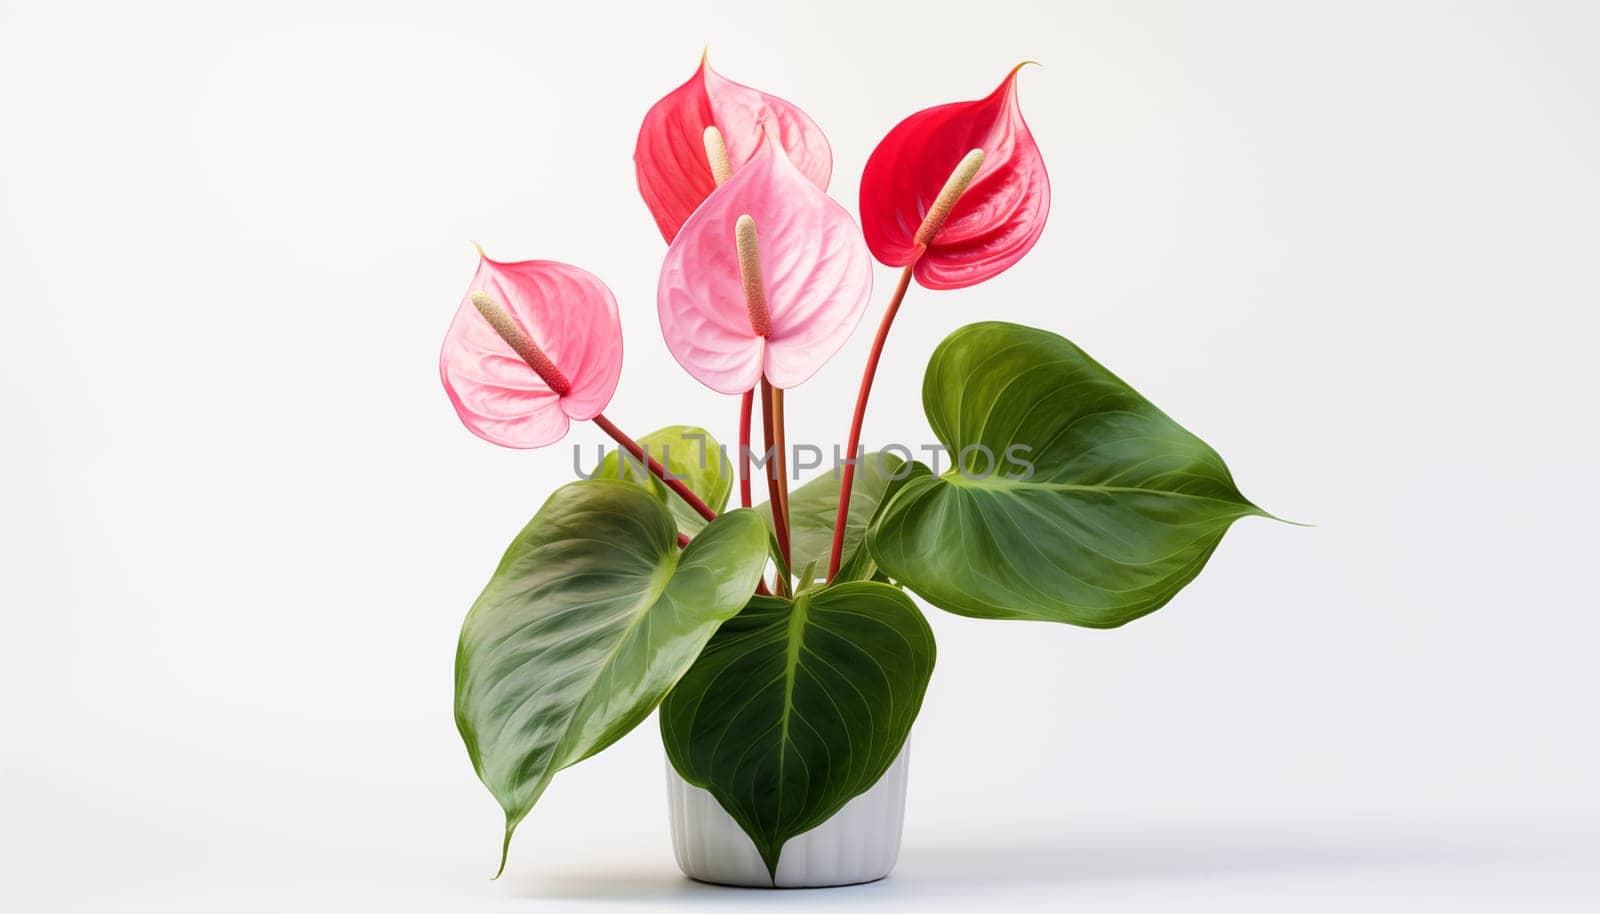 A bright and colorful Anthurium with its heart-shaped by Nadtochiy